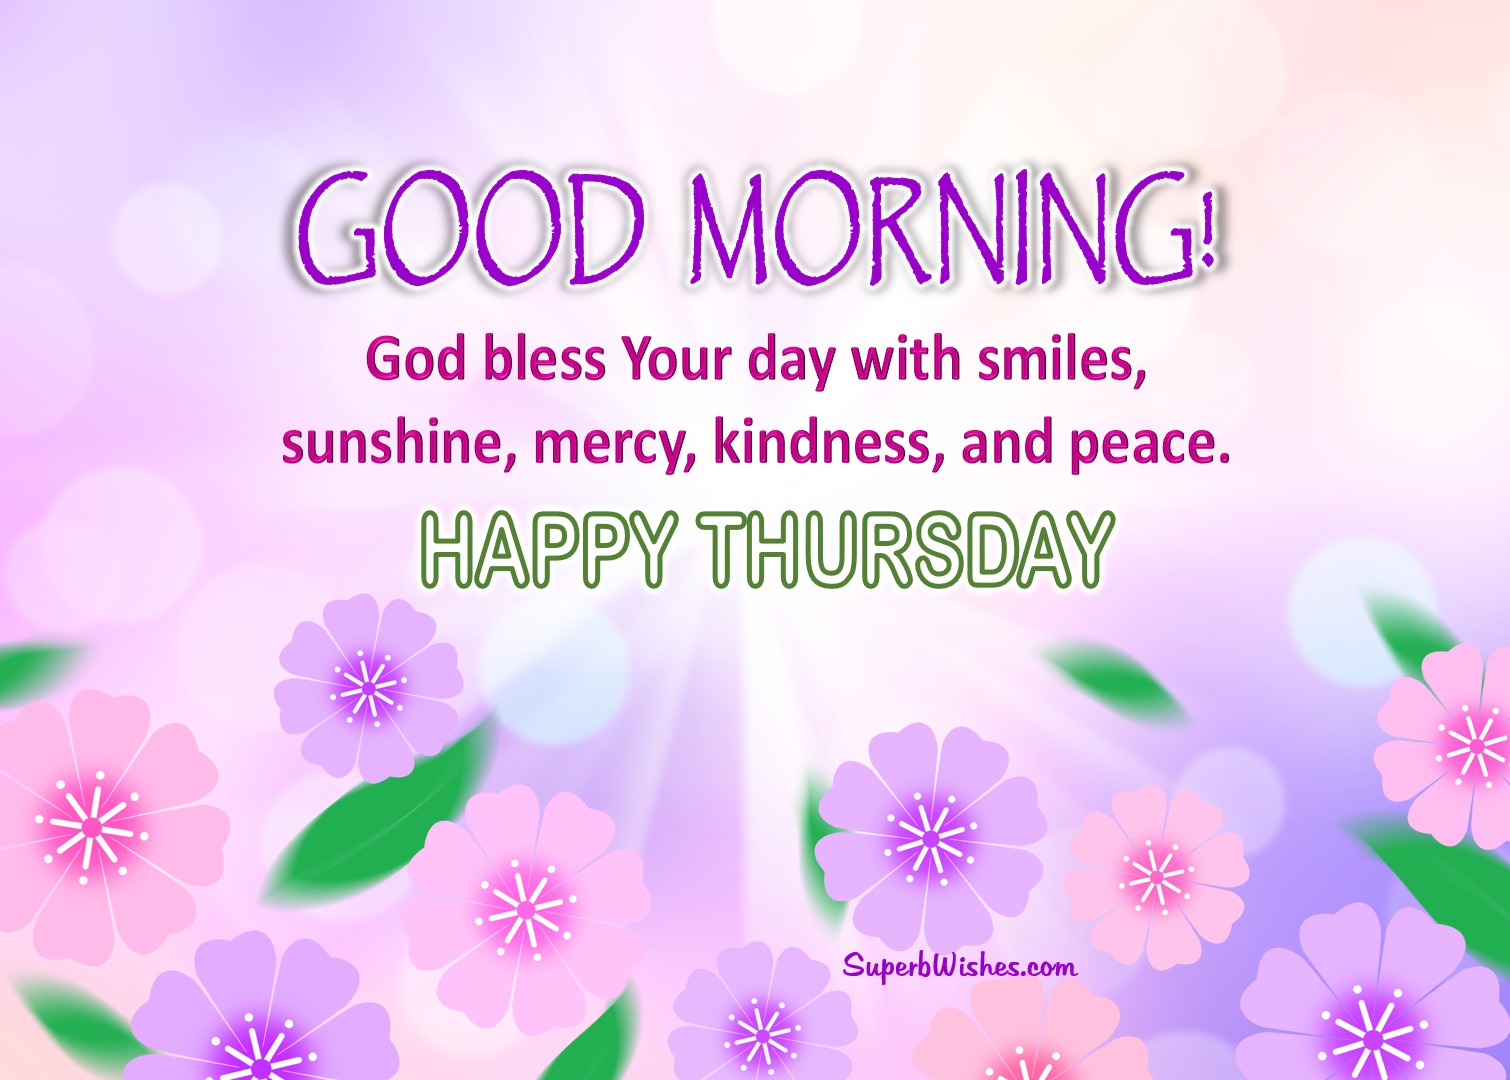 Happy Thursday inspirational quotes and images. Superbwishes.com